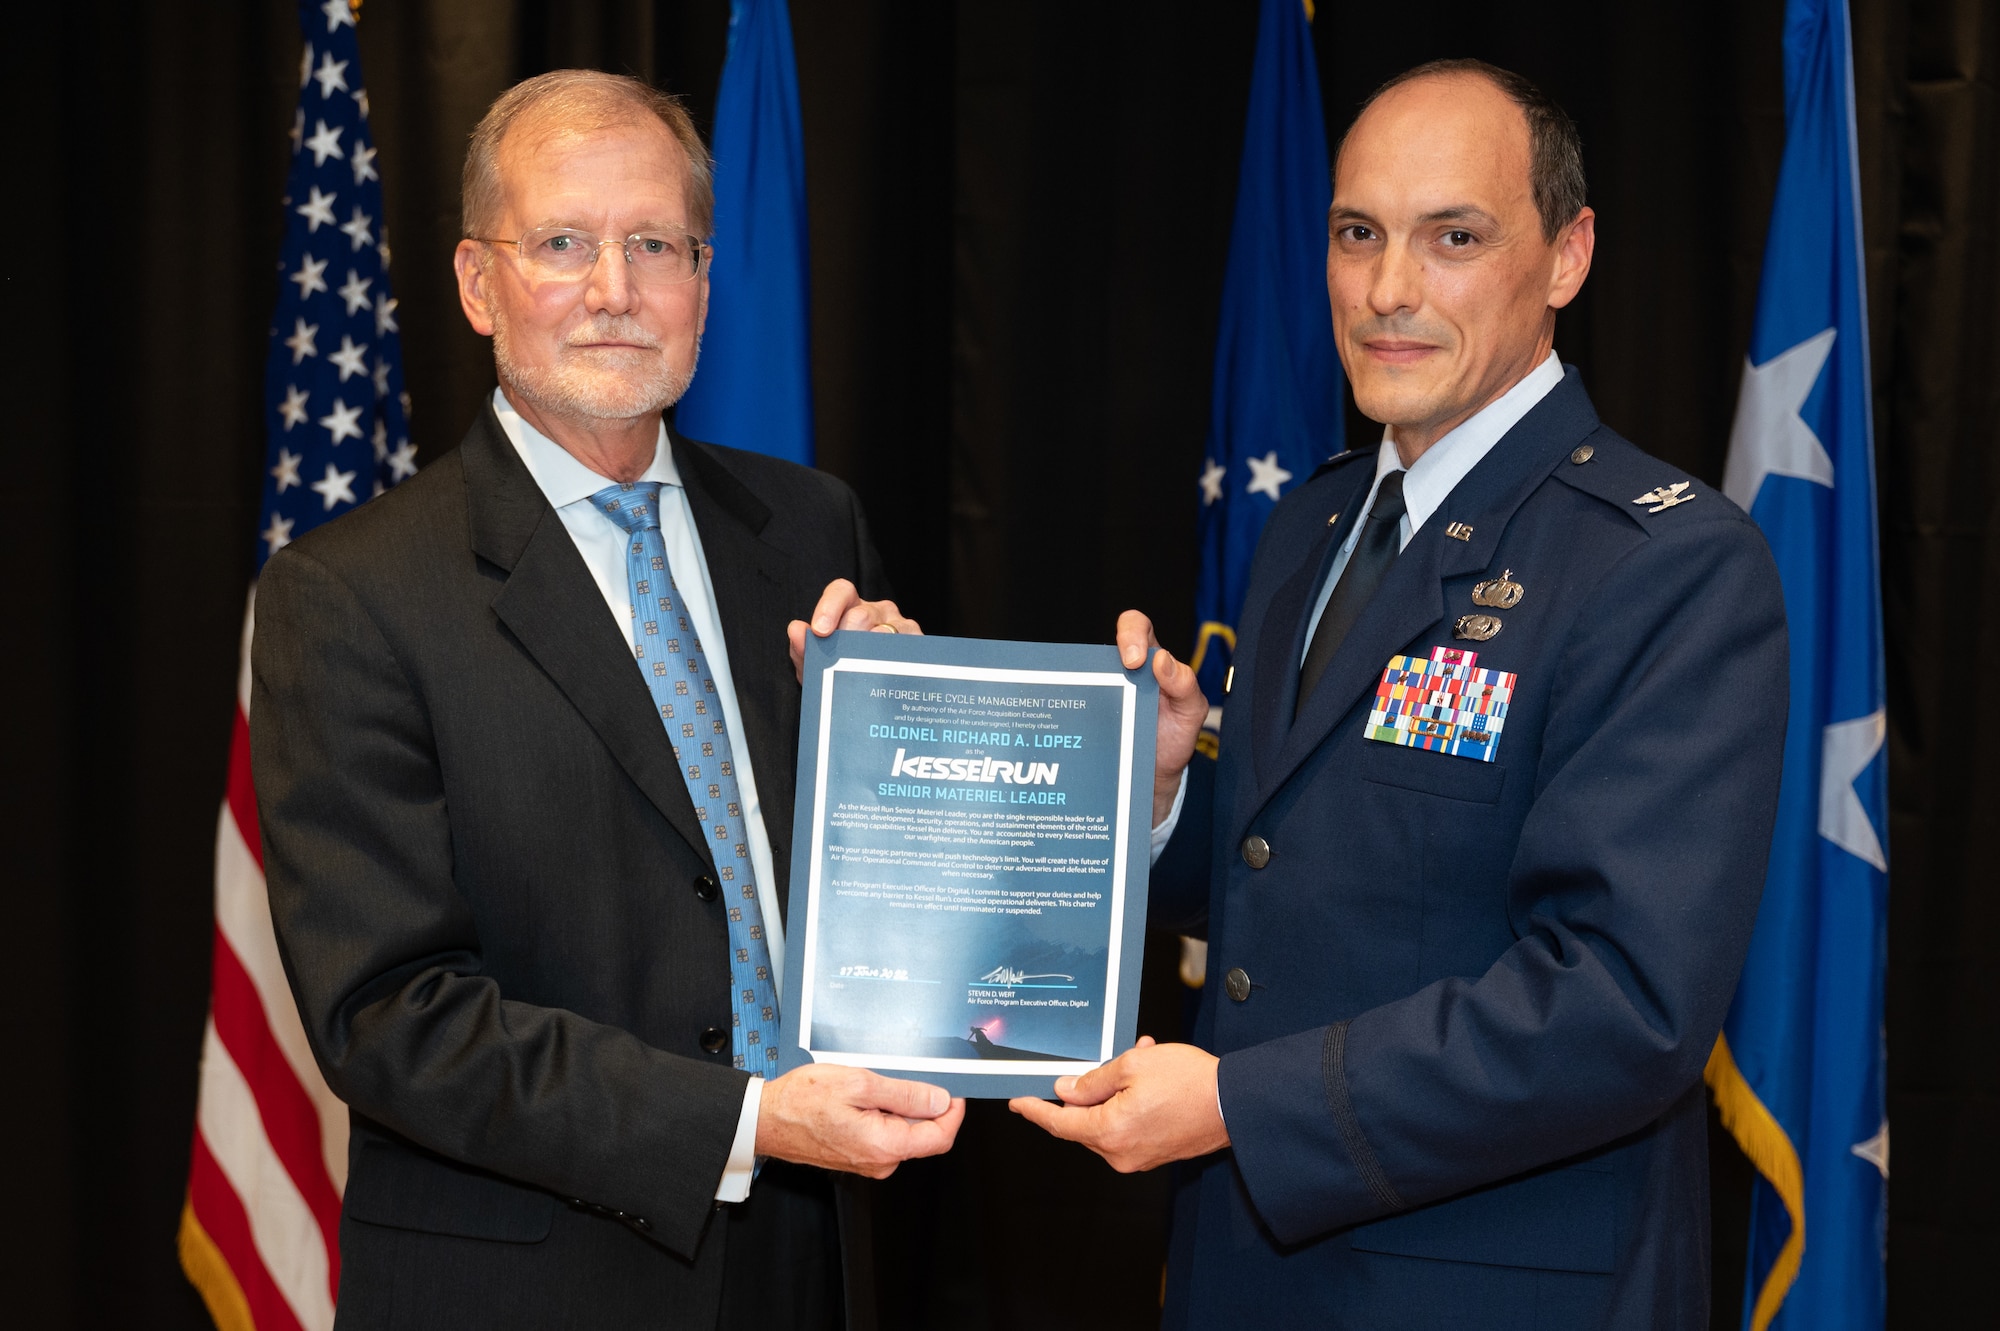 Steven Wert, program executive officer, Digital, presents a certificate to Col. Richard Lopez, Kessel Run senior materiel leader, during a transition ceremony at the unit’s headquarters in Boston, June 27. Kessel Run transitioned from a detachment to a division of Air Force Life Cycle Management Center’s Digital Directorate. (U.S. Air Force photo by Jerry Saslav)